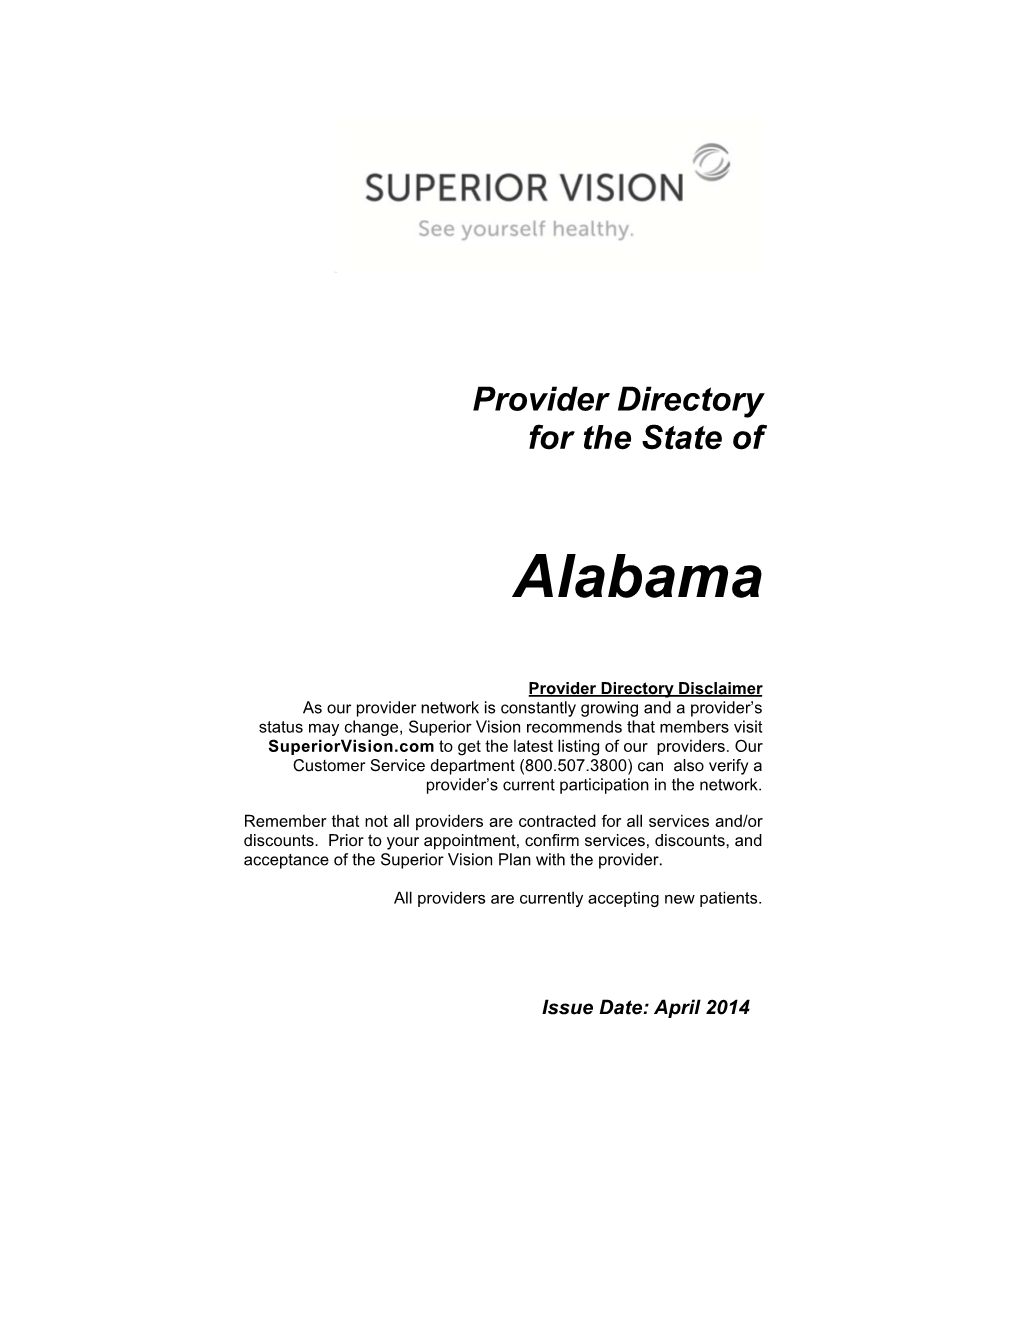 Superior Vision Recommends That Members Visit Superiorvision.Com to Get the Latest Listing of Our Providers